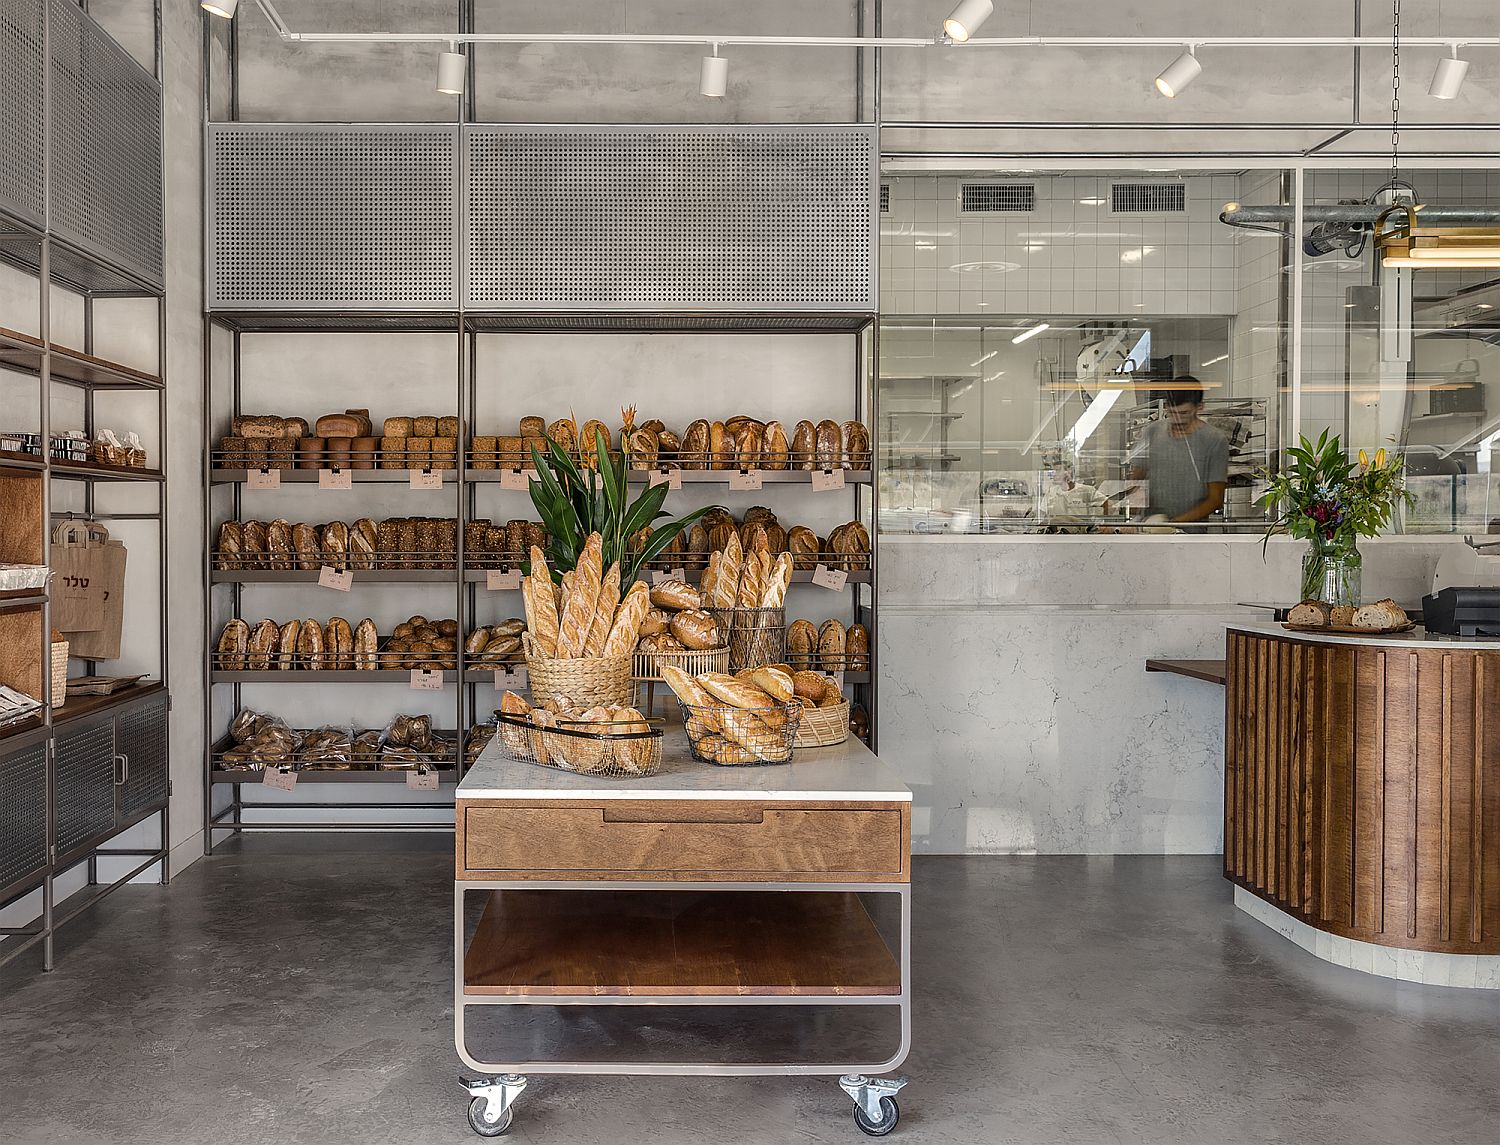 Teller Bakery and Pastry Factory Blends Modernity with Industrial Ease